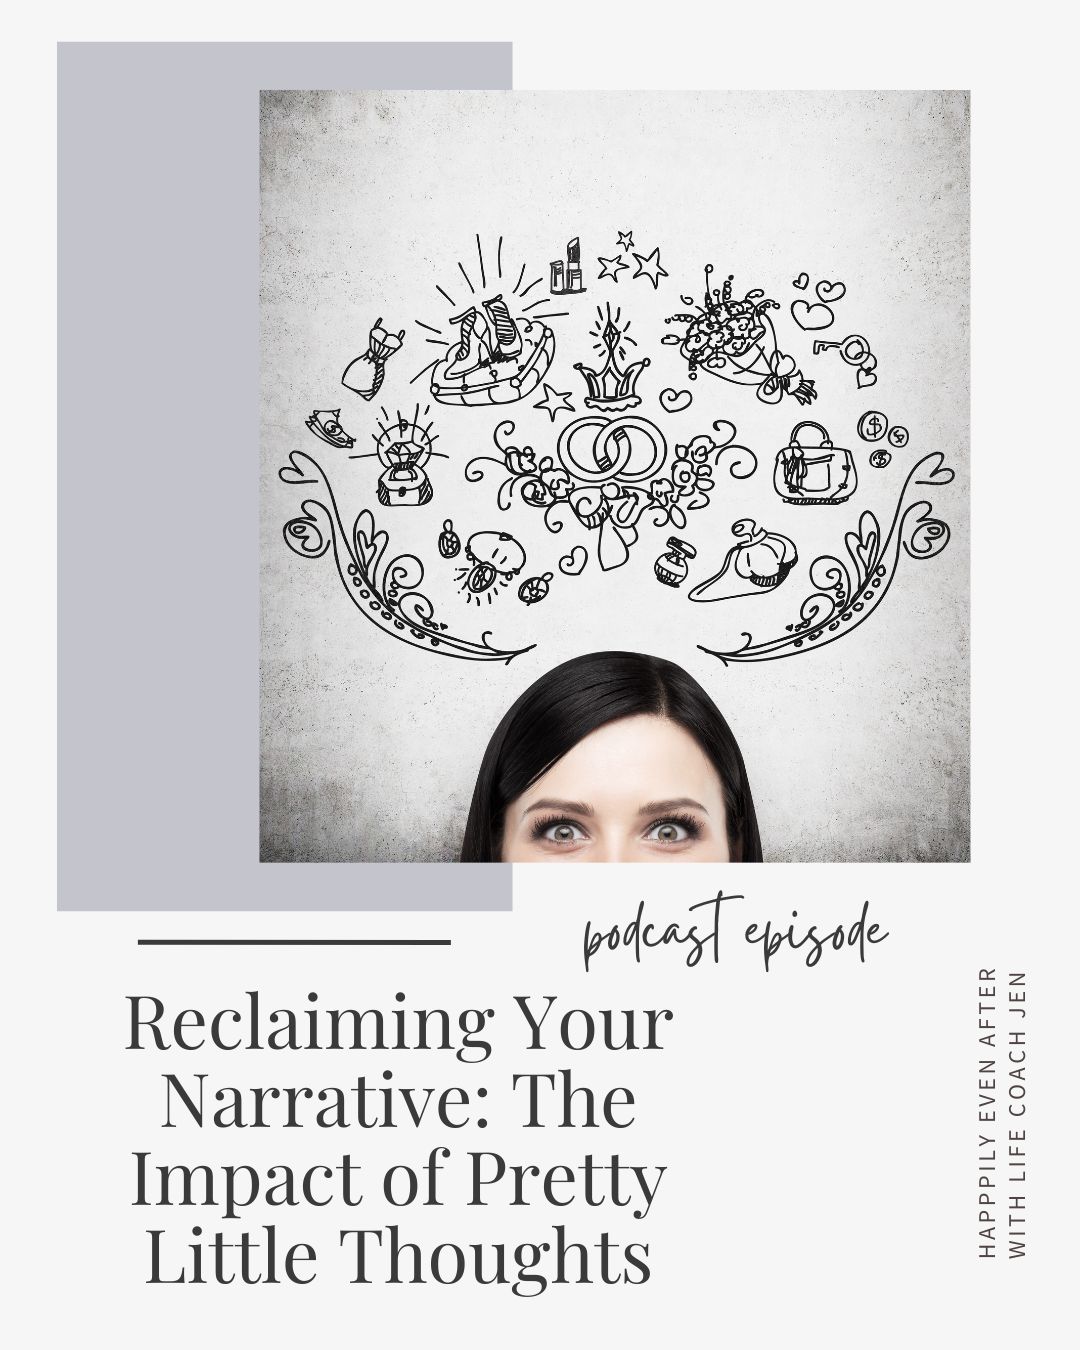 Woman peeking from behind a podcast promotional poster featuring whimsical illustrations, titled "reclaiming your narrative: pretty little thoughts".